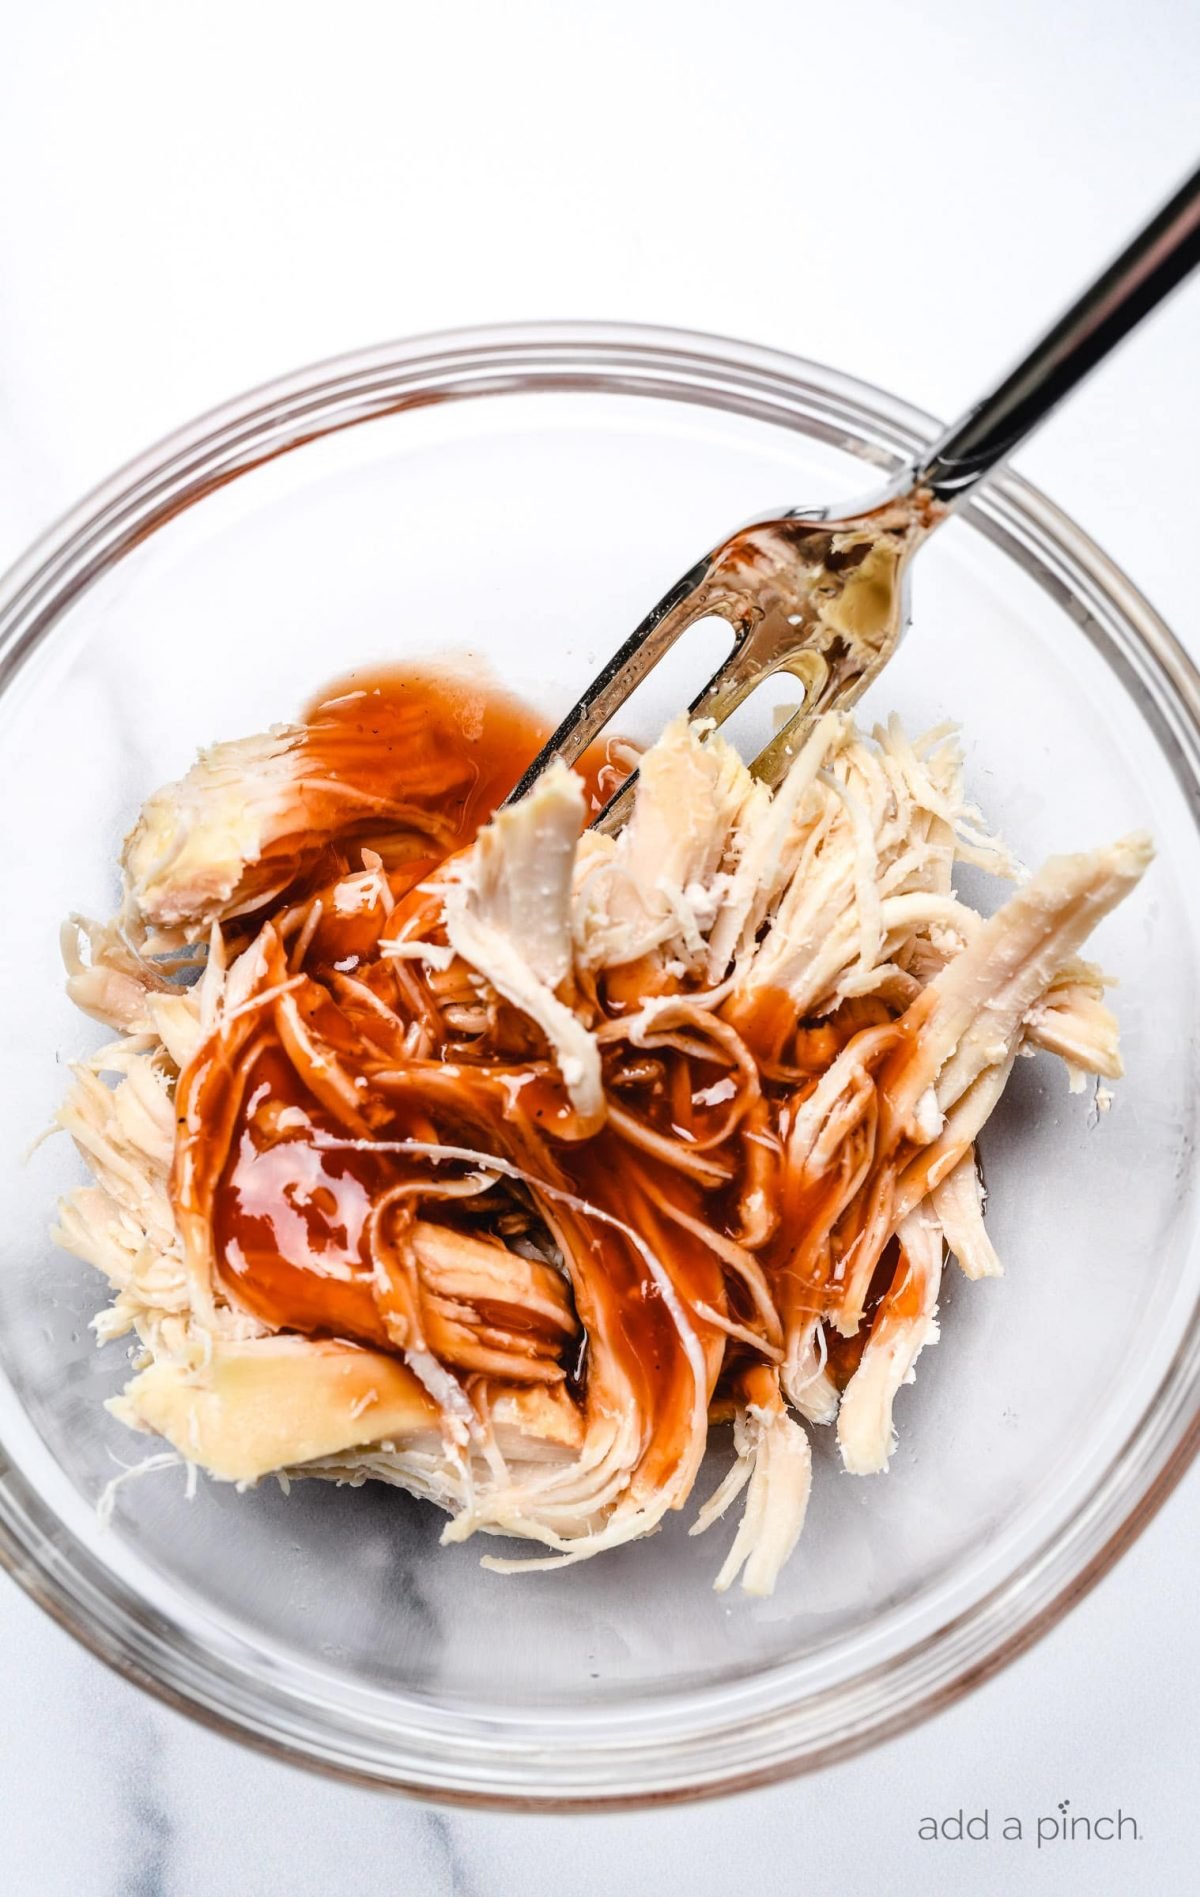 Shredded chicken in a glass bowl topped with BBQ Sauce.